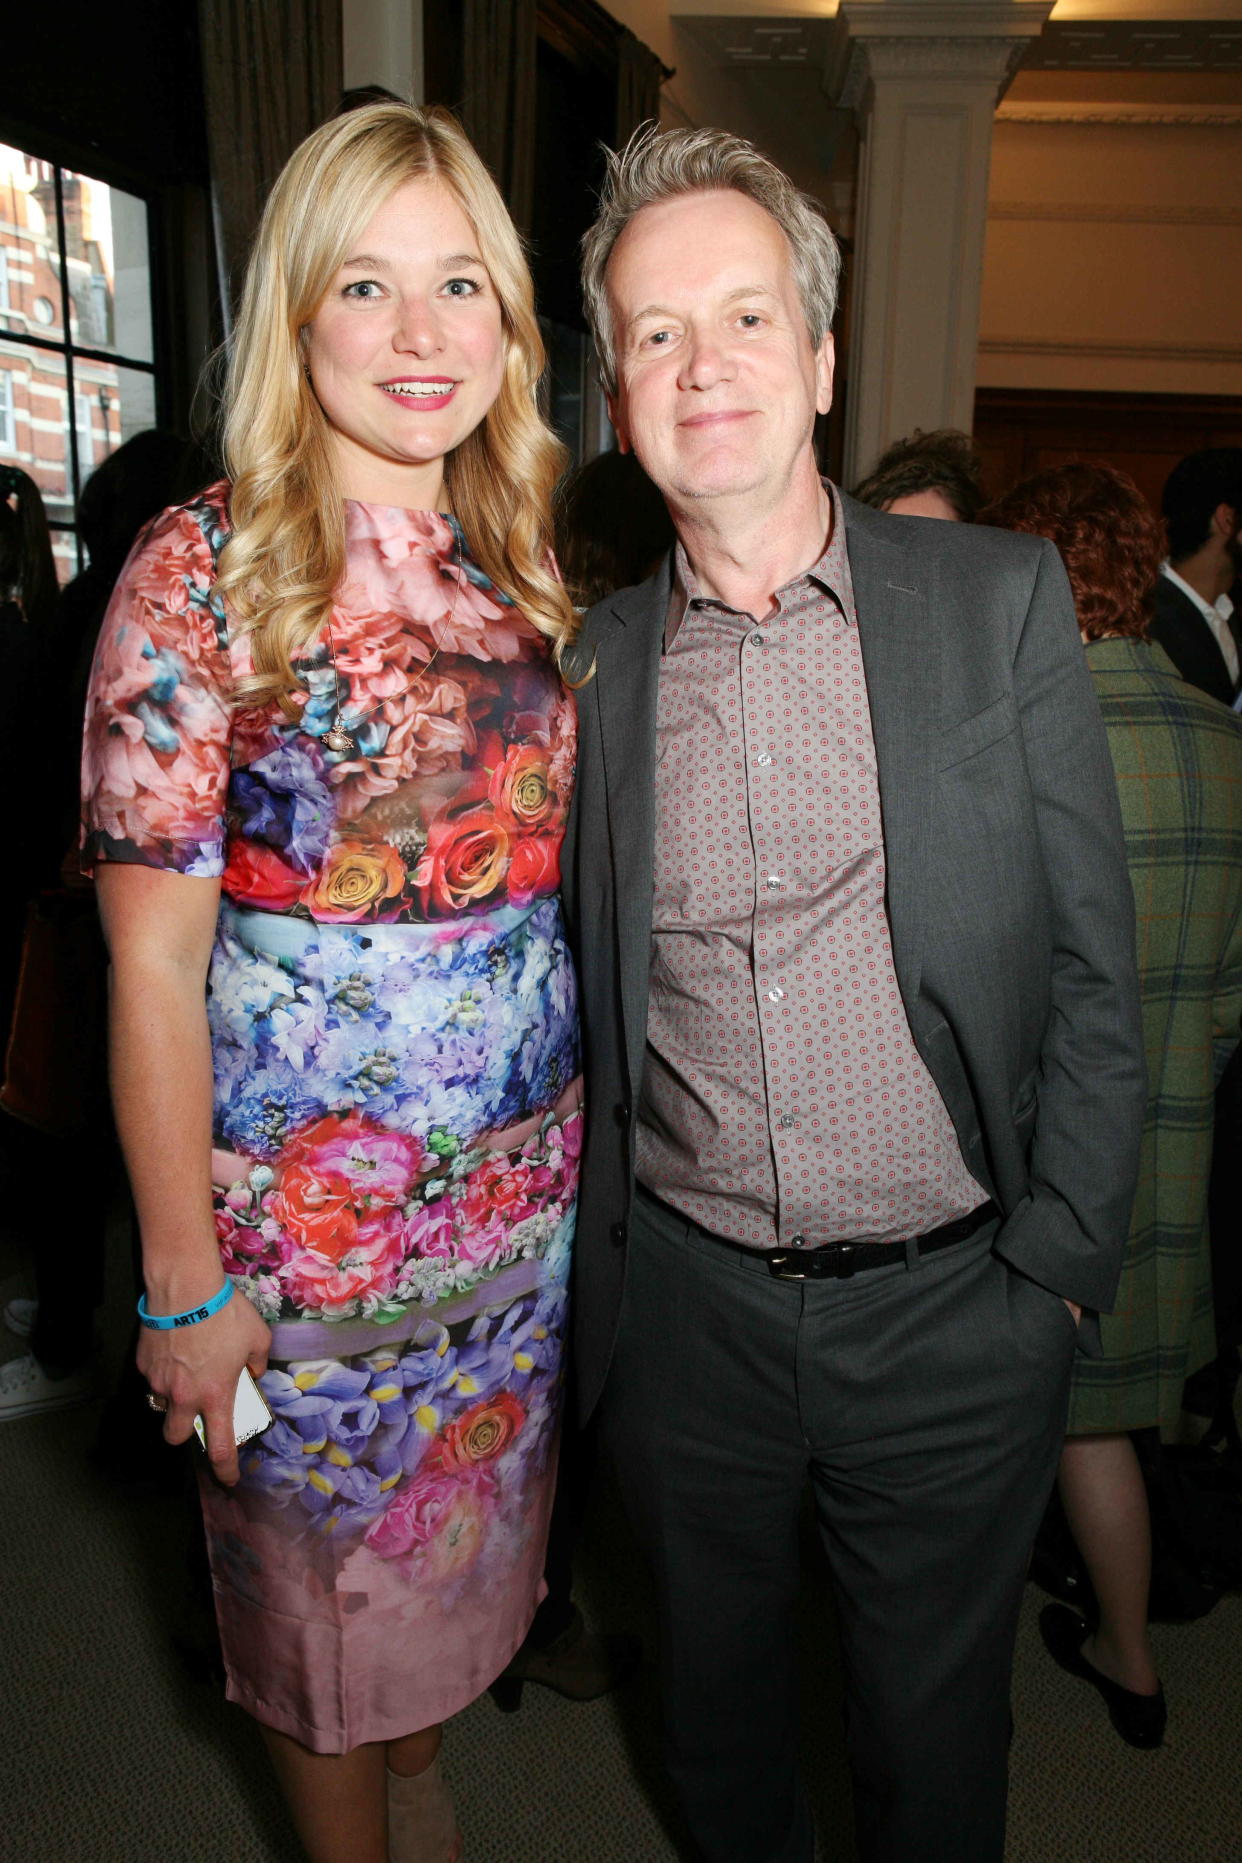 LONDON, ENGLAND - MAY 20:  Kate Bryan and Frank Skinner attend the Art15 Preview Night & Freedom Audit Exhibition at Kensington Olympia on May 20, 2015 in London, United Kingdom.  (Photo by David M. Benett/Getty Images for ART15)